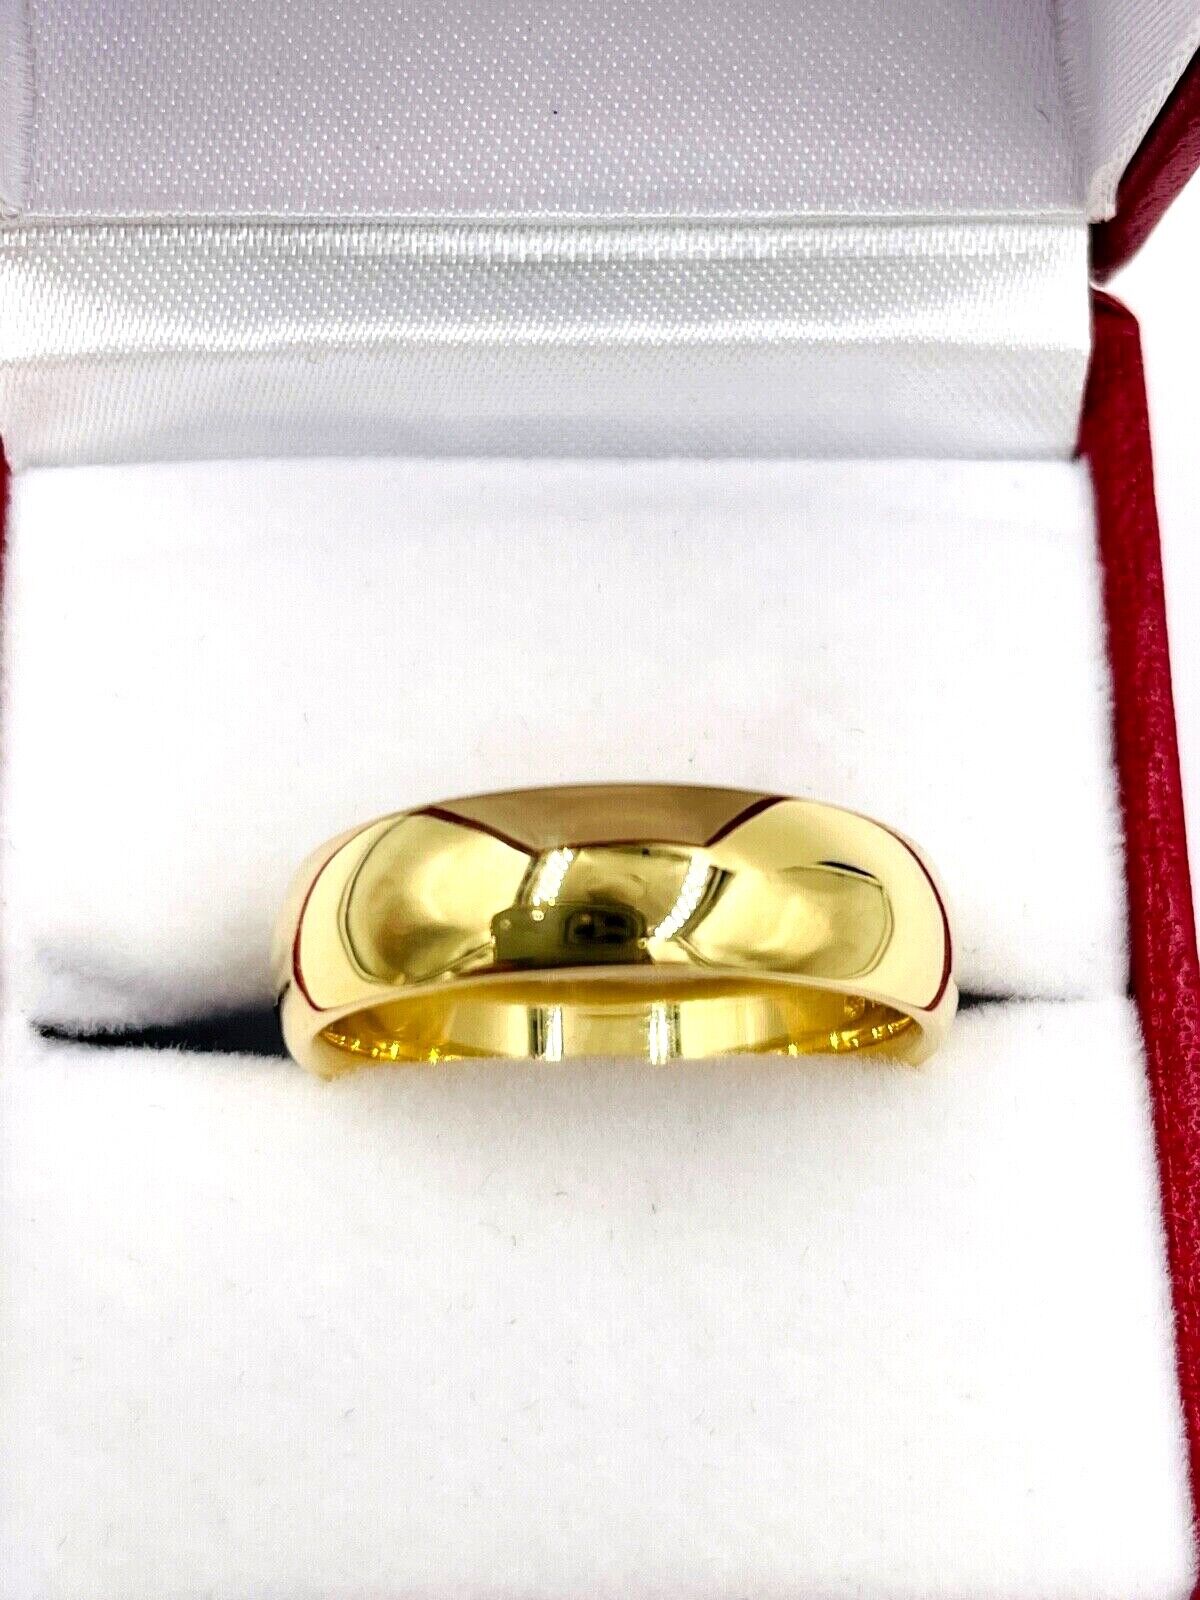 18K Yellow Gold Solid Wedding Band size 9.5 6mm wide